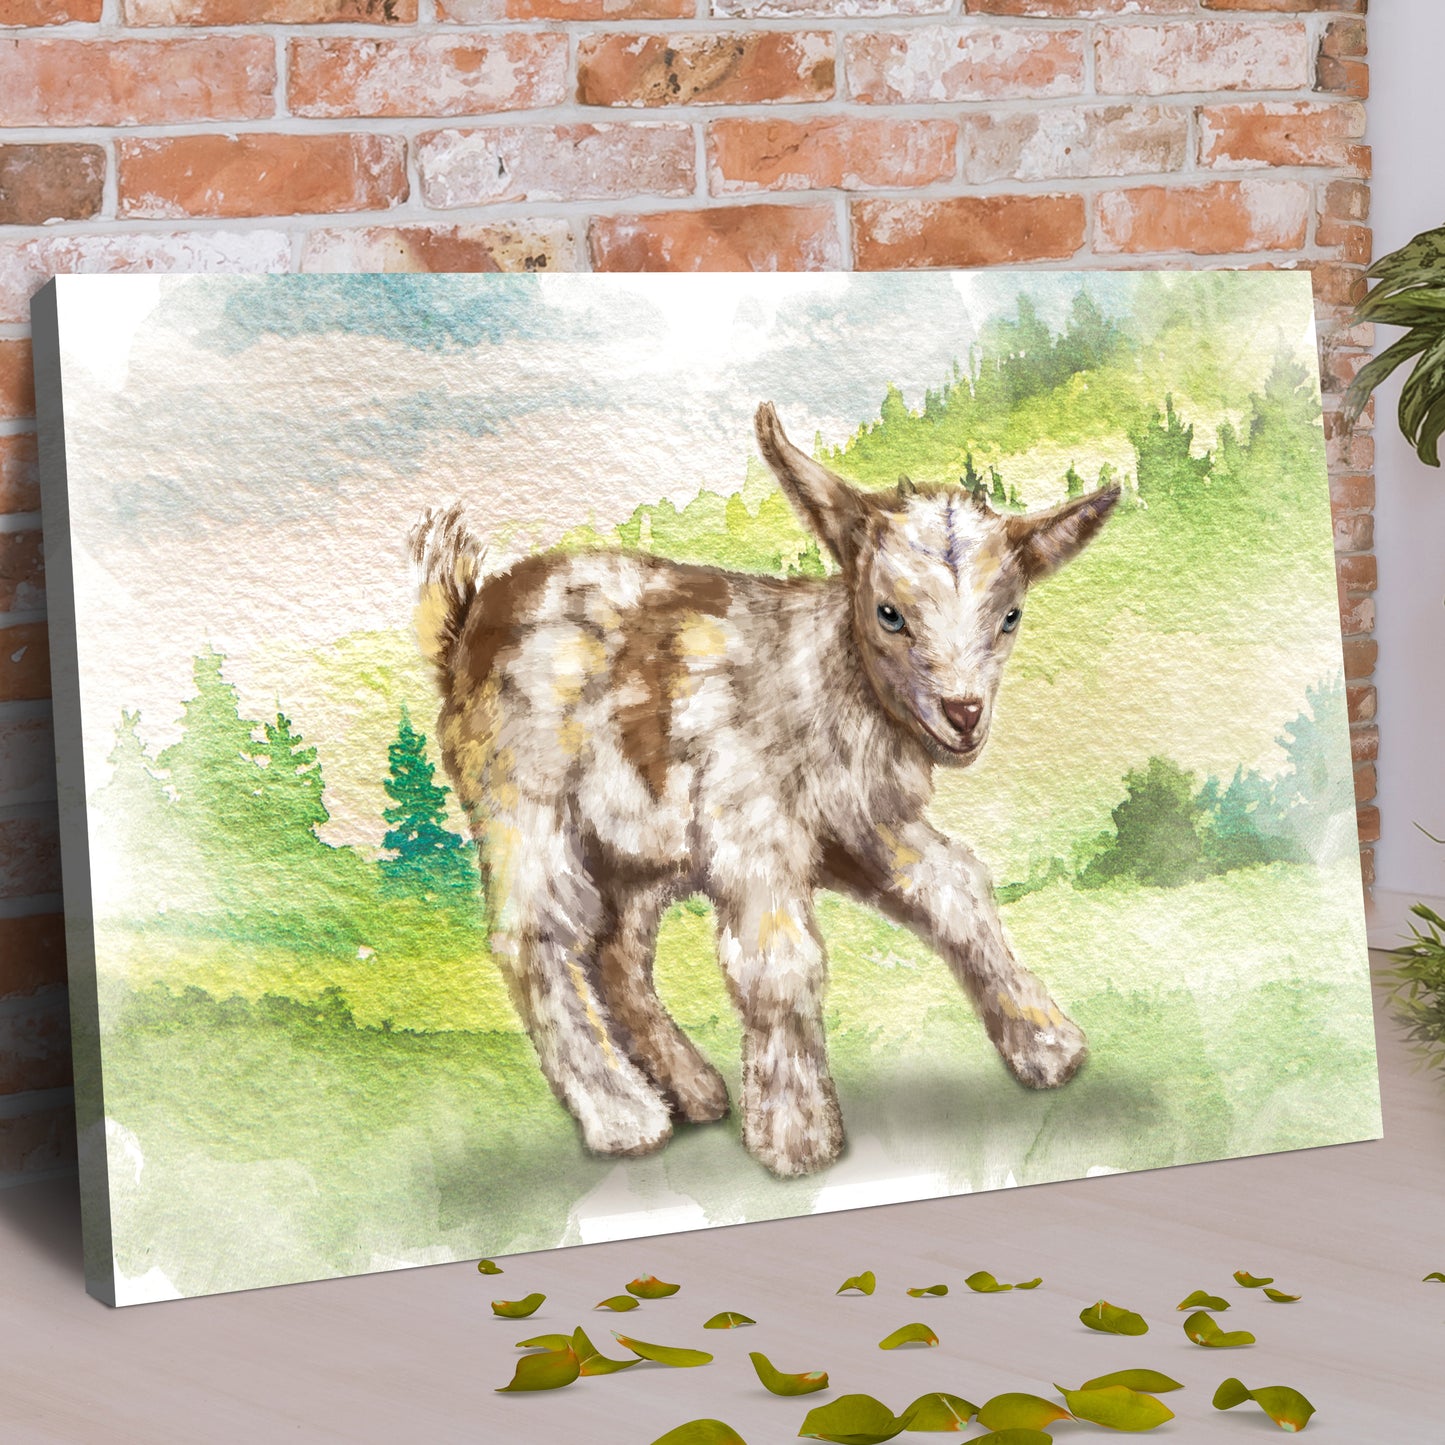 Adorable Baby Goat Canvas Wall Art Style 1 - Image by Tailored Canvases